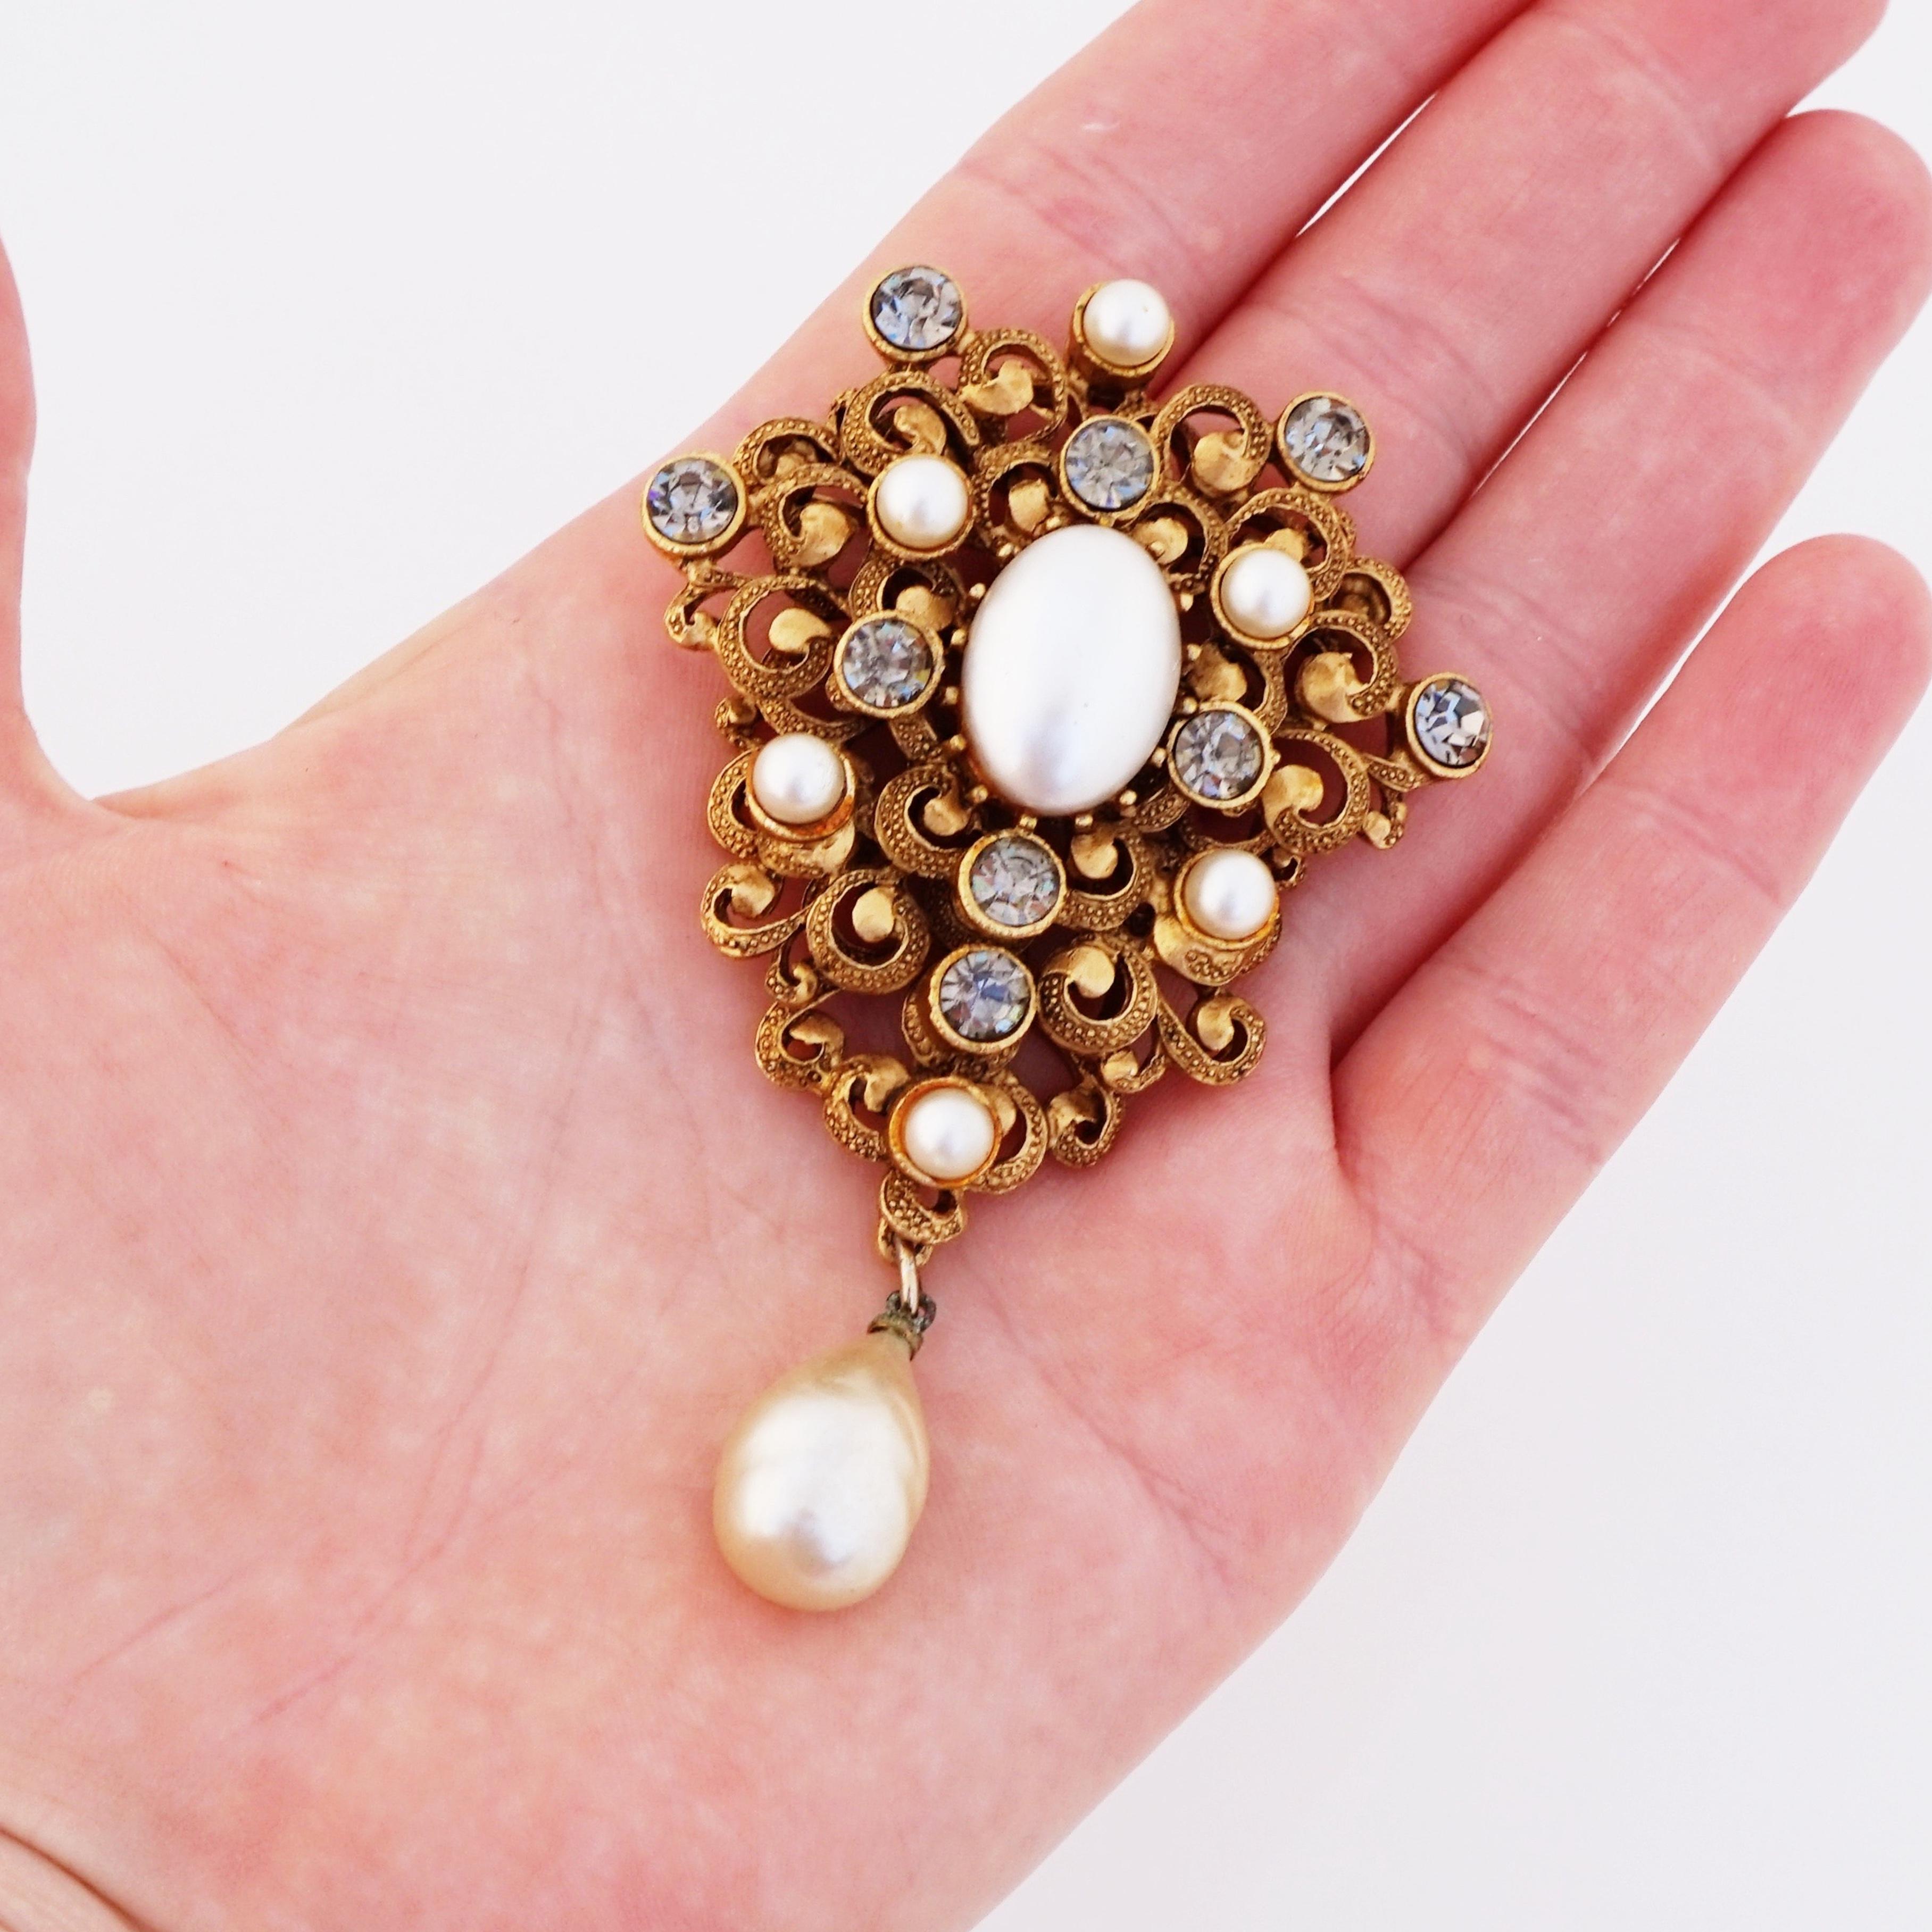 1950s Baroque Gilded Scrolls Brooch With Faux Pearls & Rhinestones By Corocraft 1